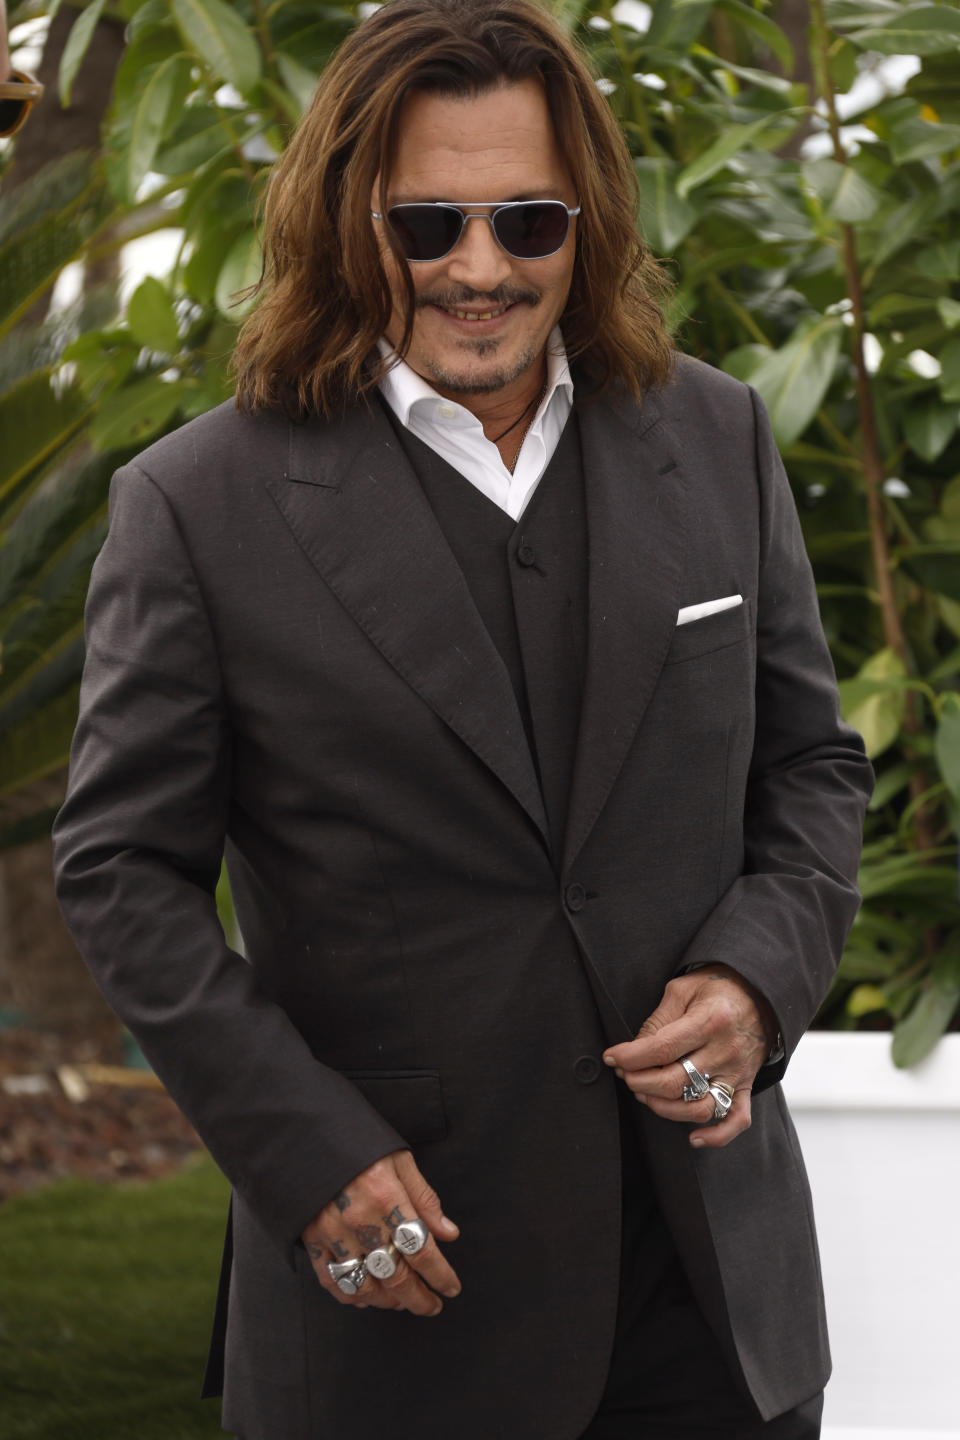 Johnny Depp poses for photographers at the photo call for the film 'Jeanne du Barry' at the 76th international film festival, Cannes, southern France, Wednesday, May 17, 2023. (Photo by Joel C Ryan/Invision/AP)